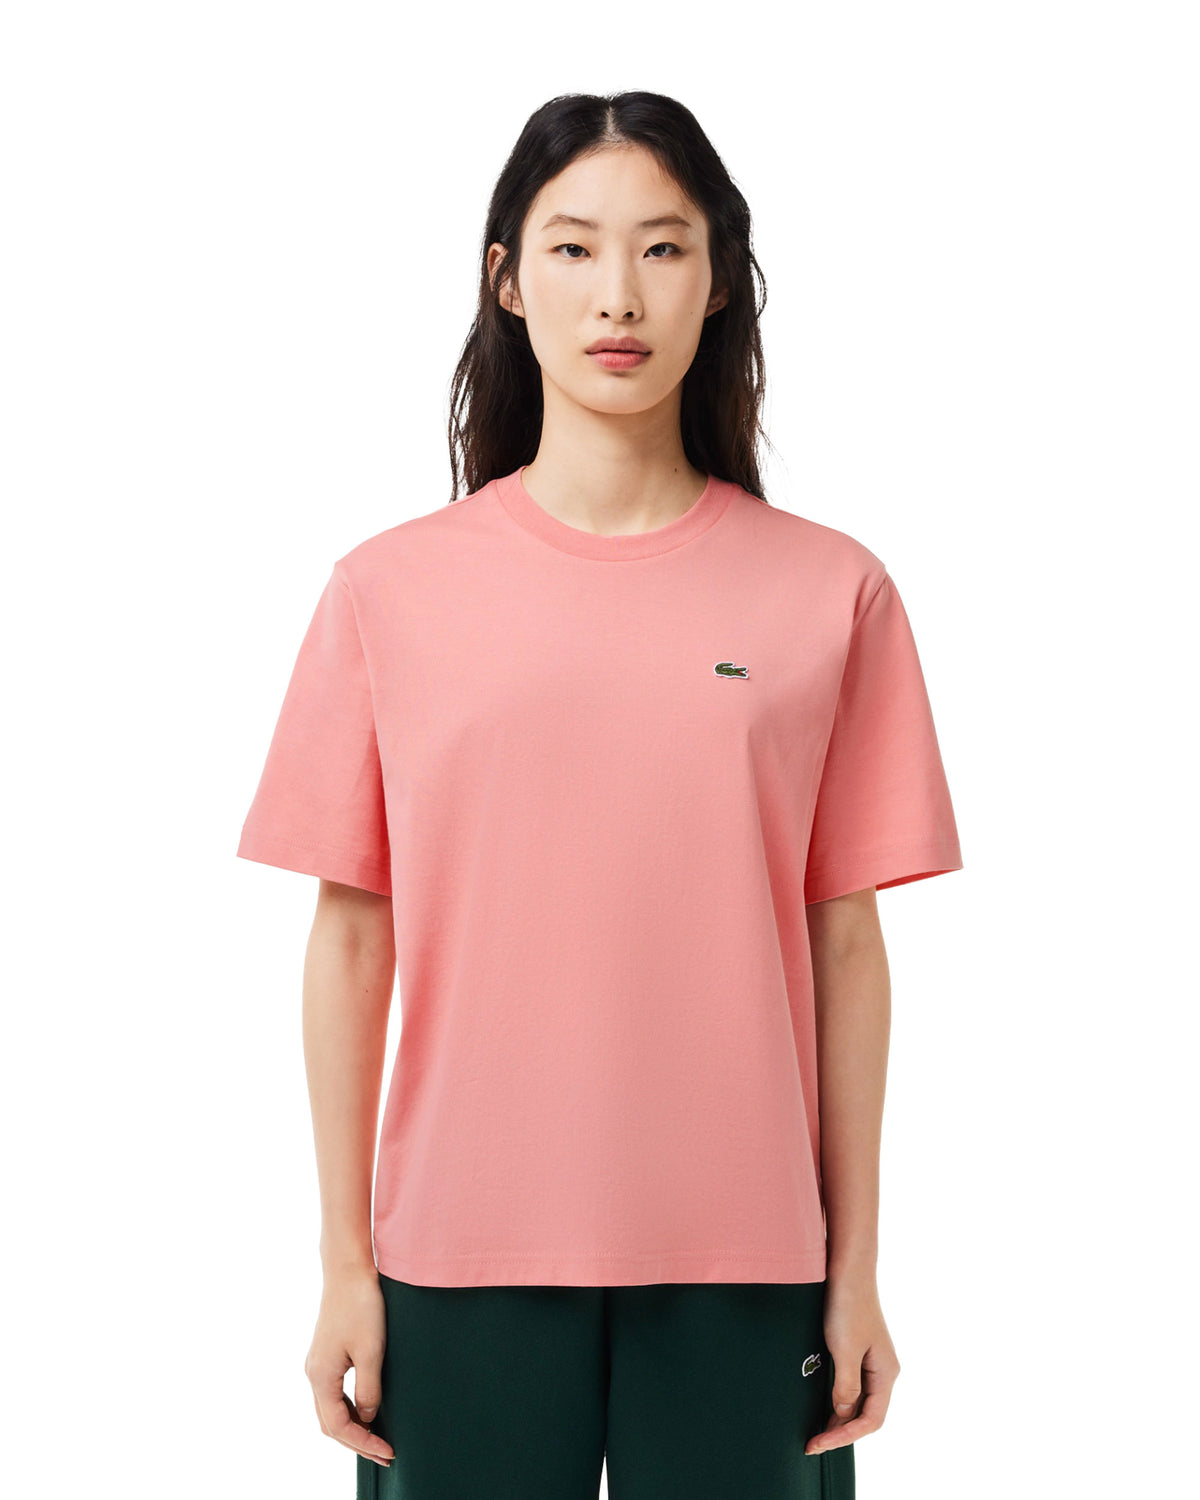 Woman's Tee Lacoste Classic Logo Pink